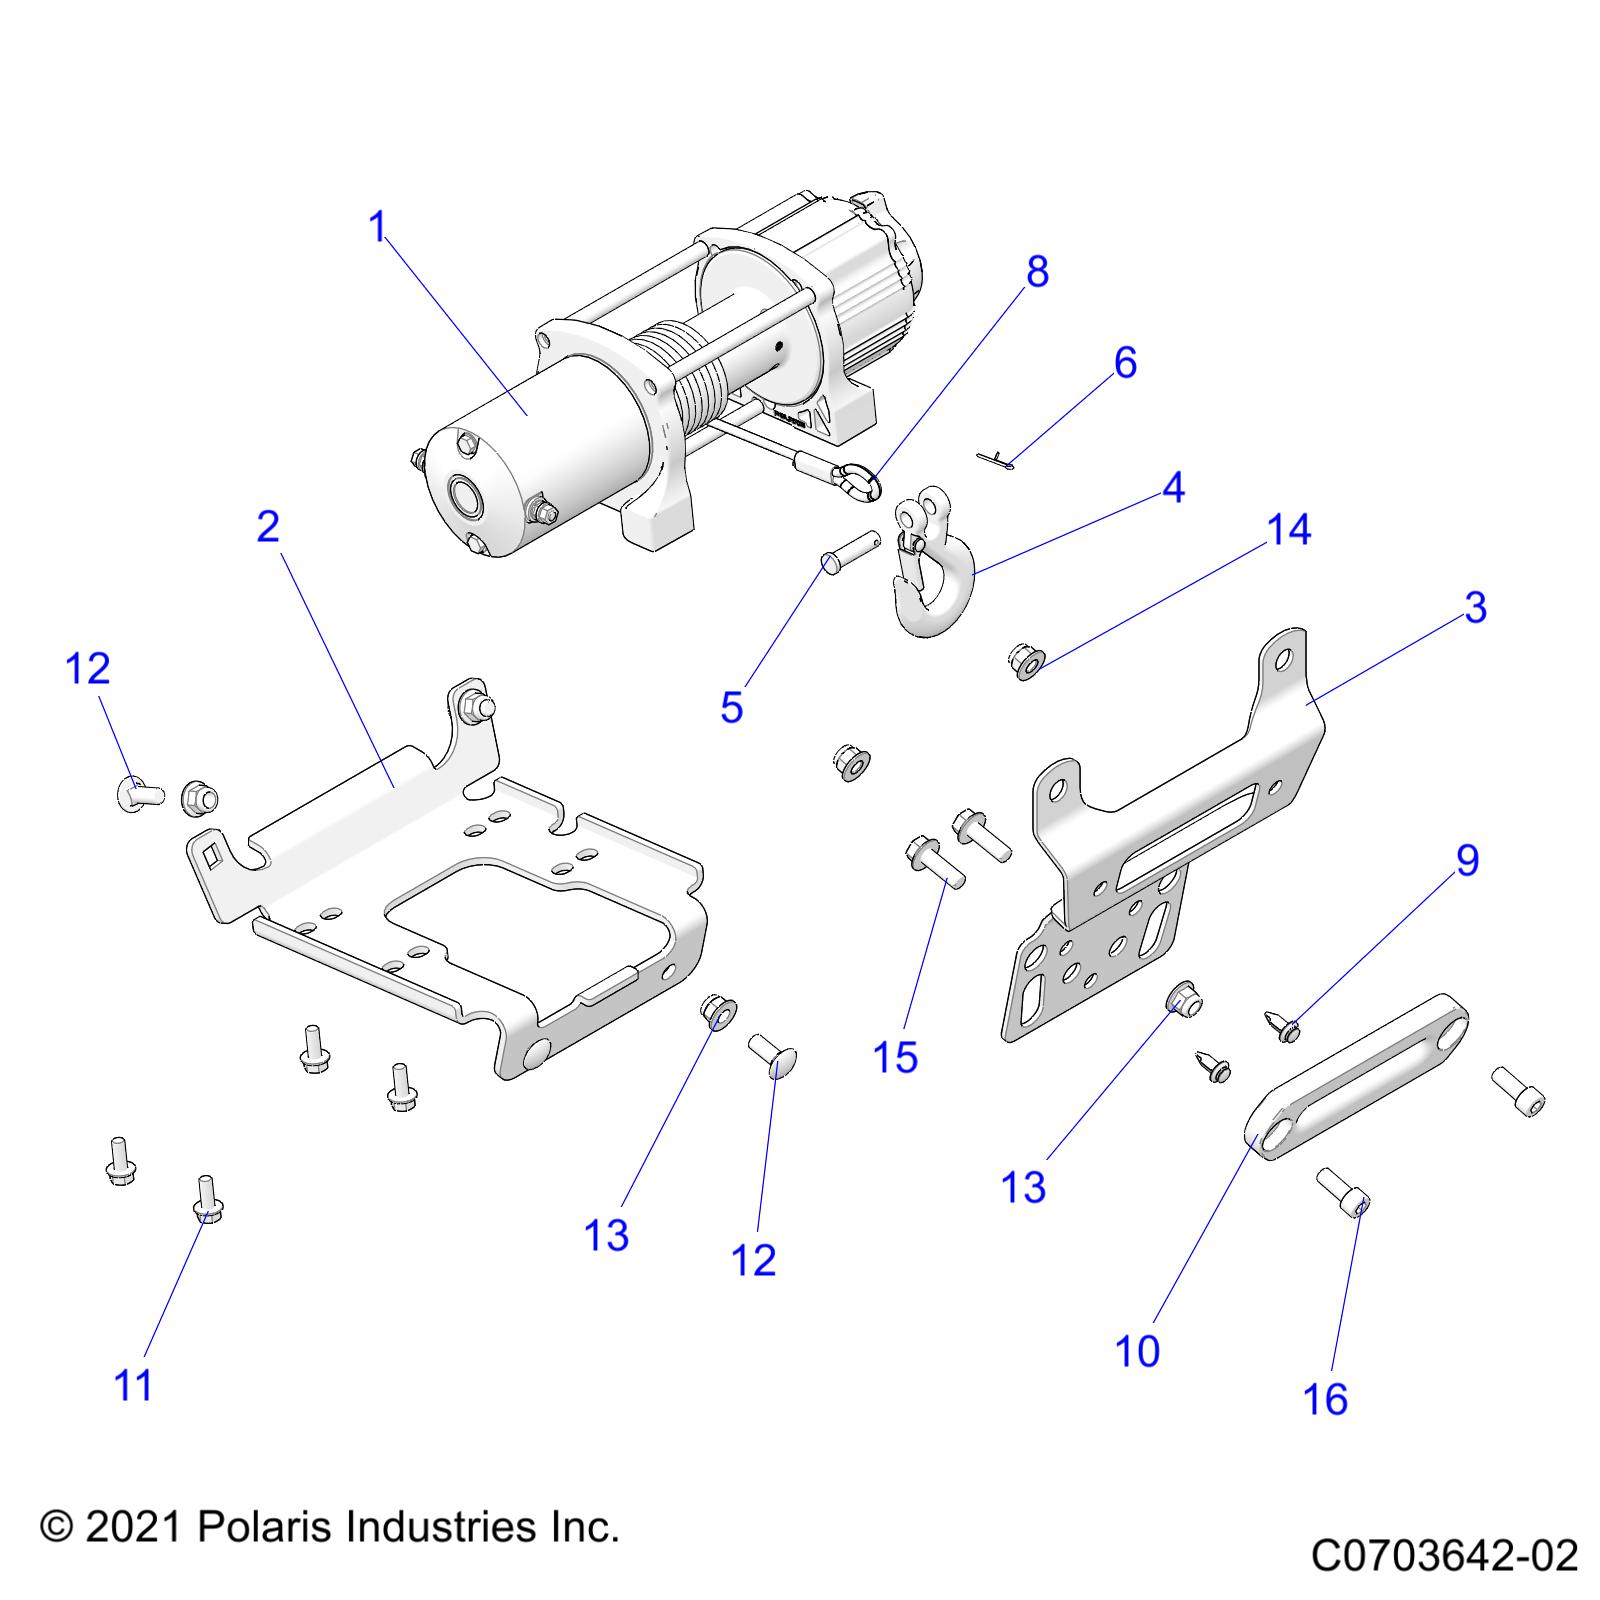 Part Number : 2205497 K-SVC HANDLE WINCH INT CAM